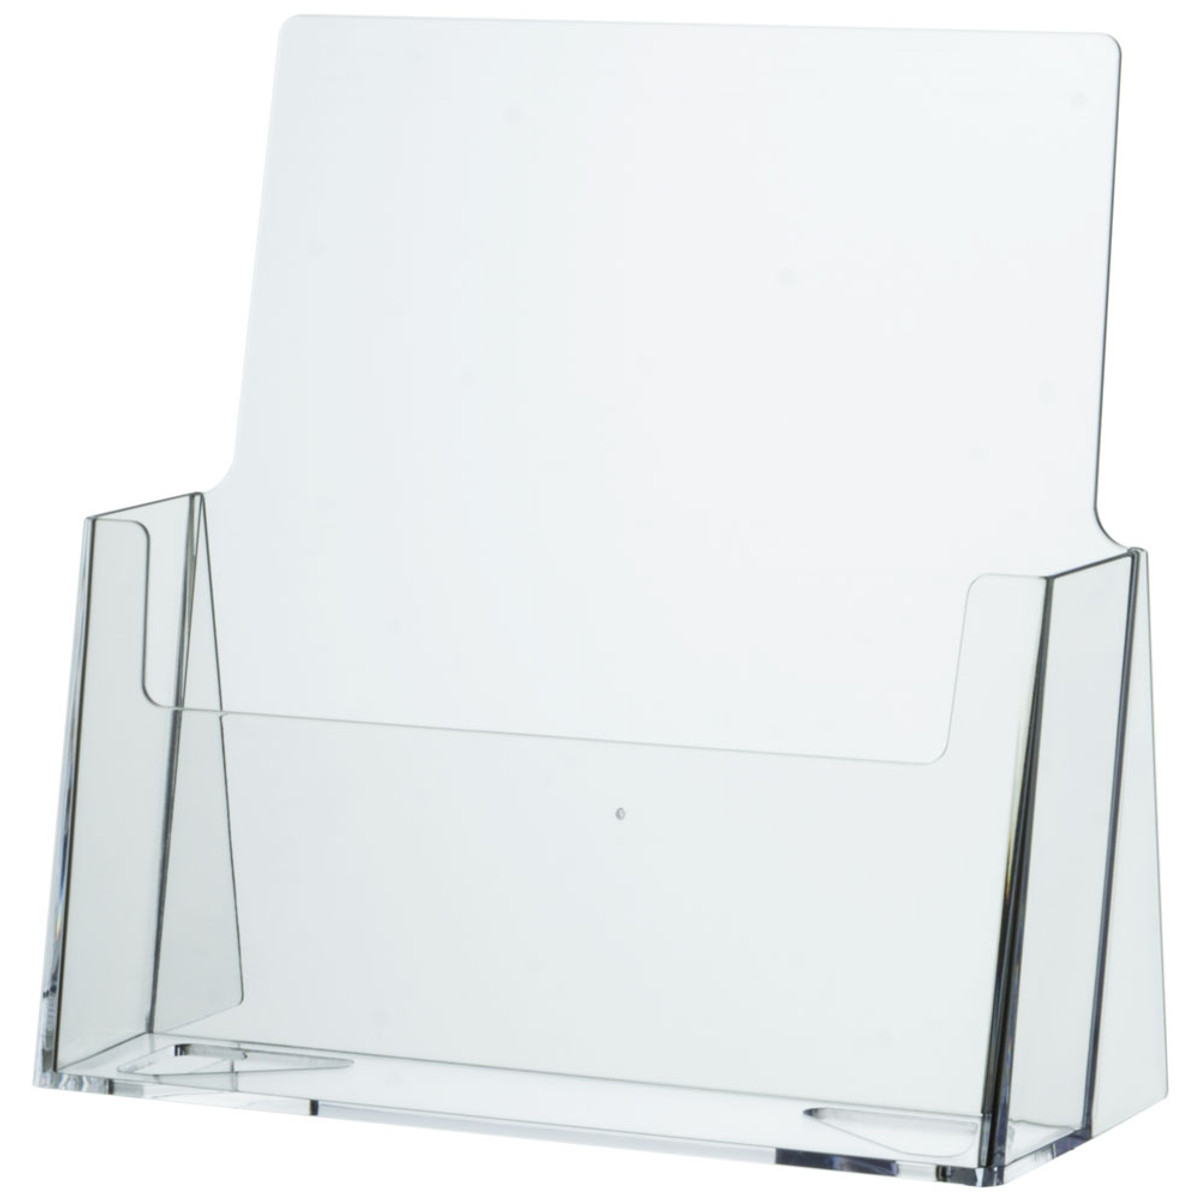 ETC® Half-page Card Holder with Rack